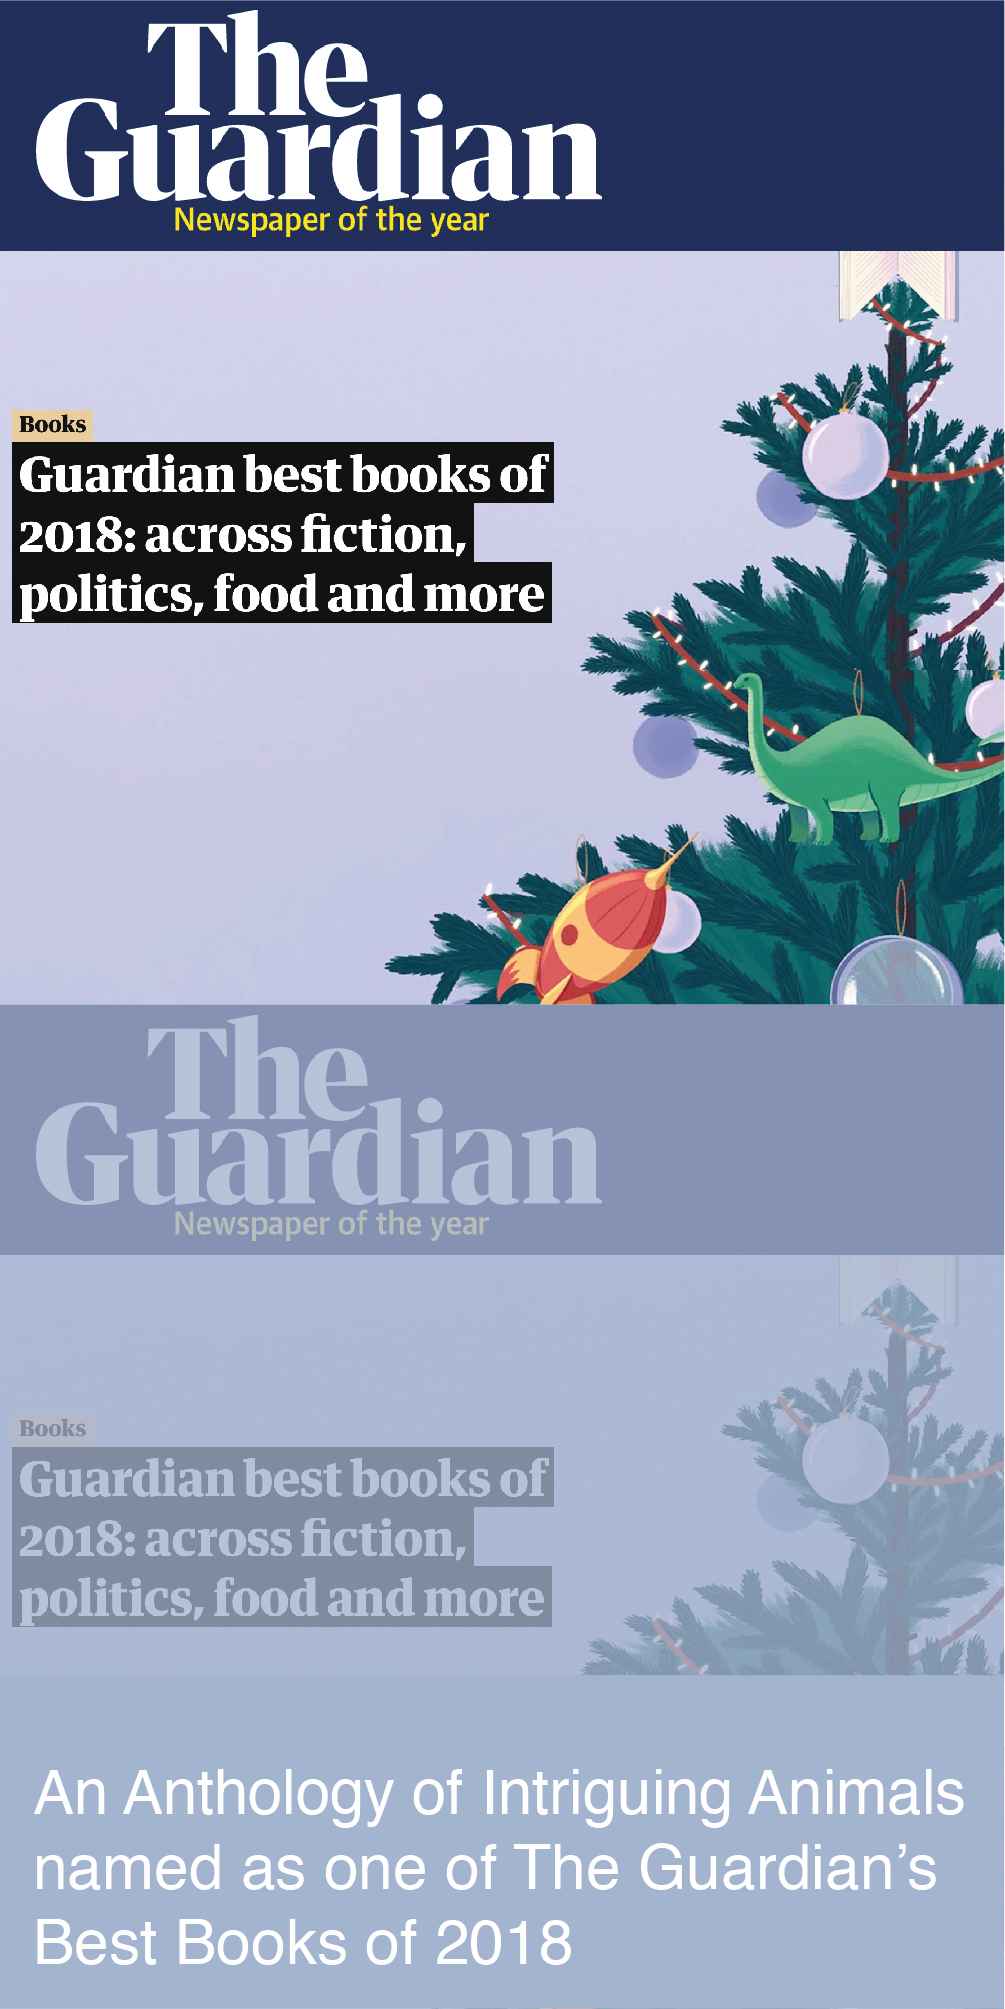 Best Books of 2018 from The Guardian